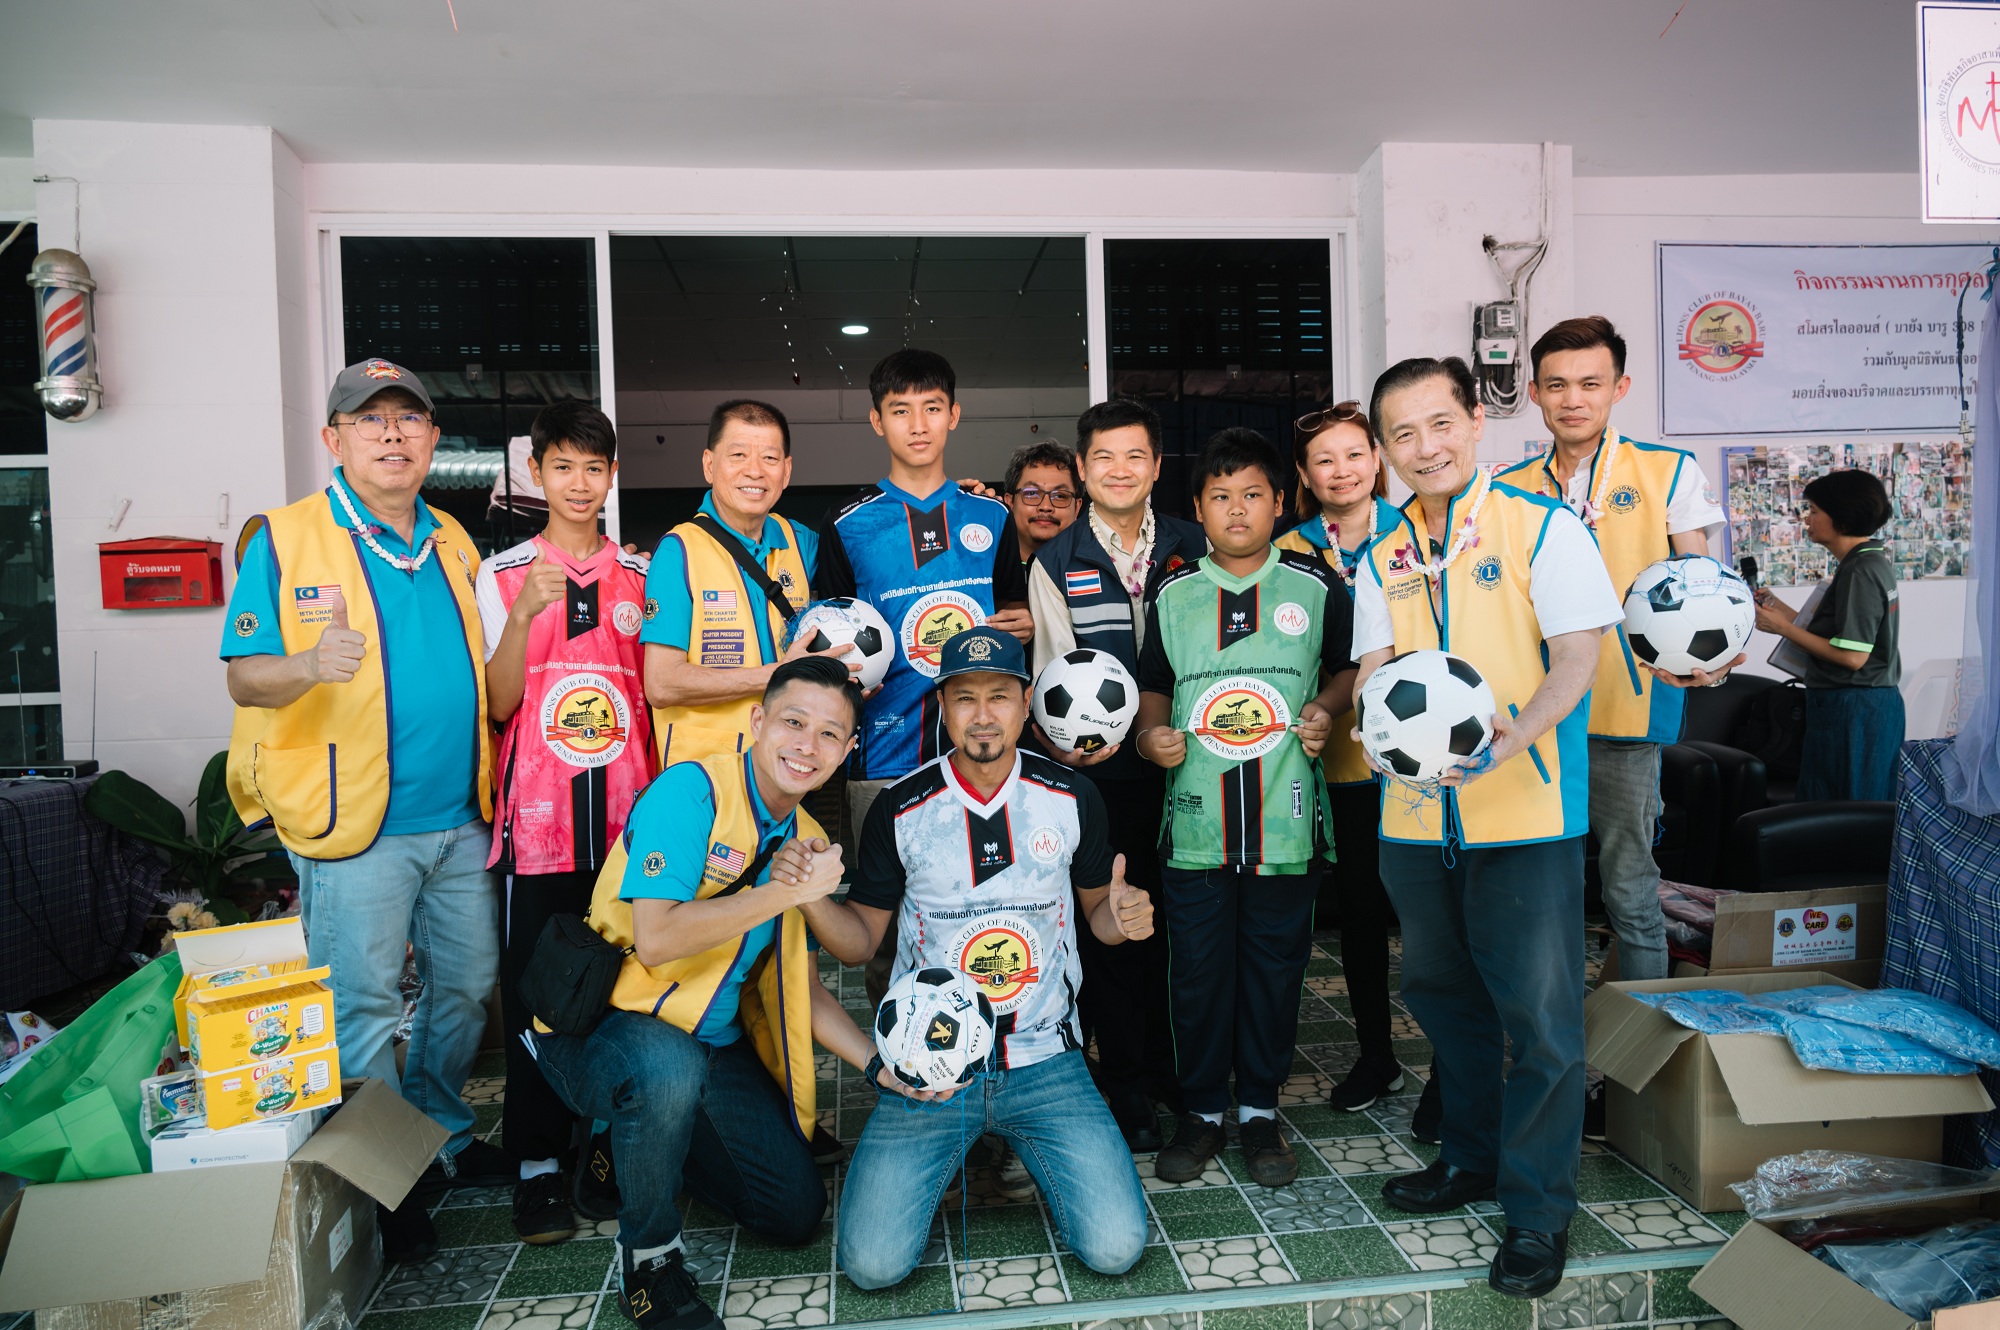 The Bayan Baru Lions Club donated football jerseys and football equipment to the hospital.